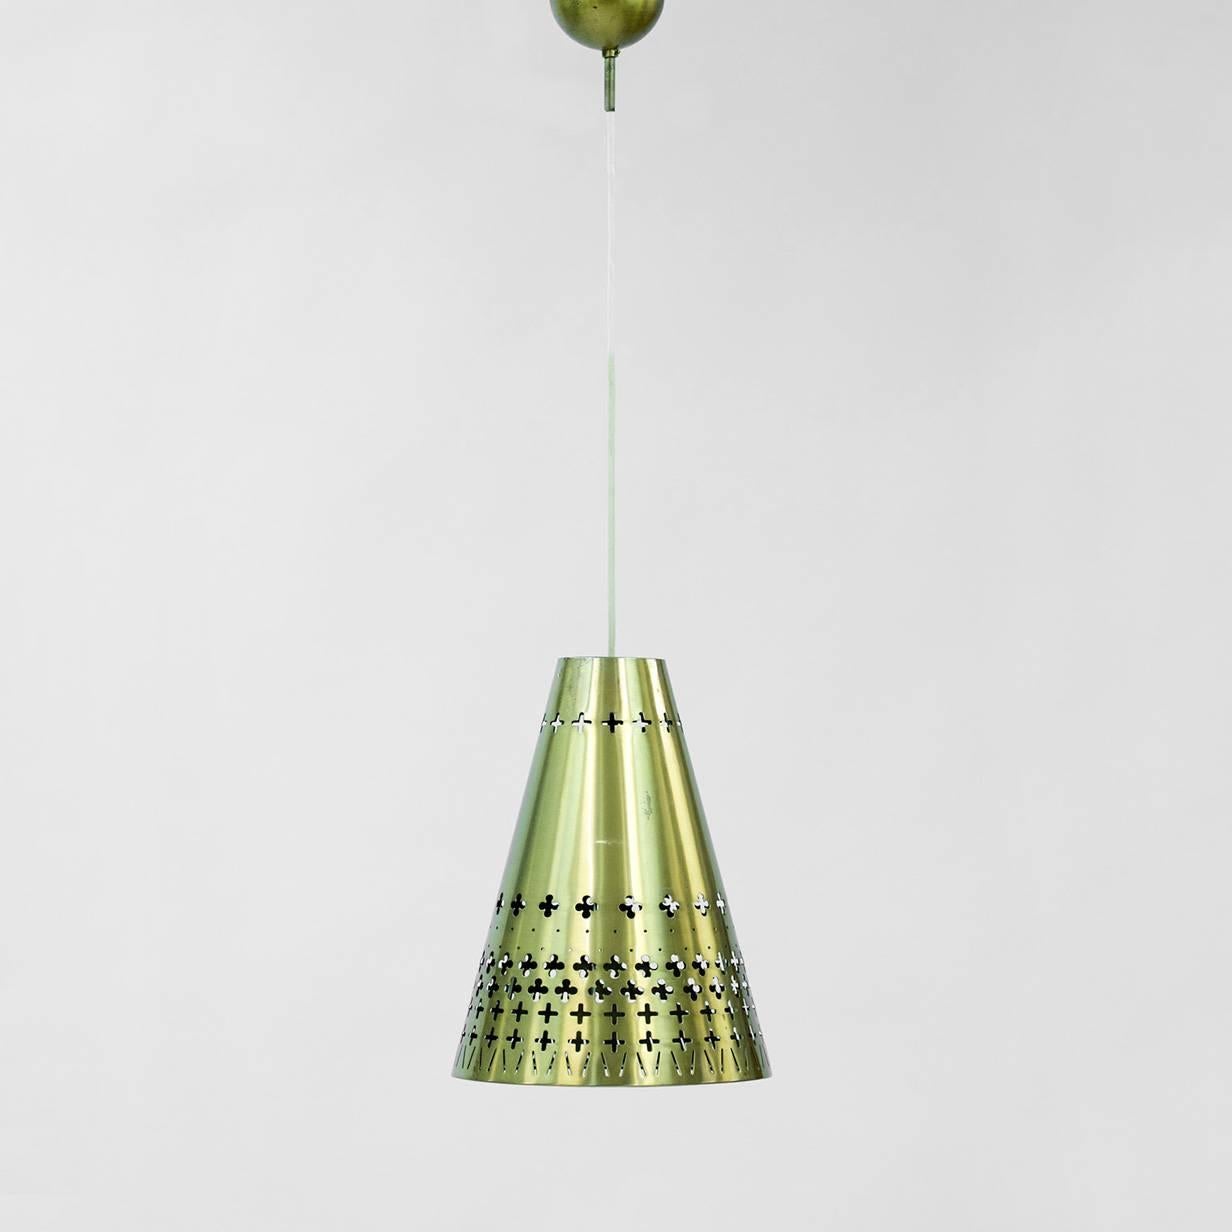 Gorgeous cone-shaped brass pendant lamp by Hans Bergström for Ateljé Lyktan. Beautiful punched out graphic pattern that lets through the light in a dramatic way. The cup for the cable is also brass, adding more elegance. New wiring.